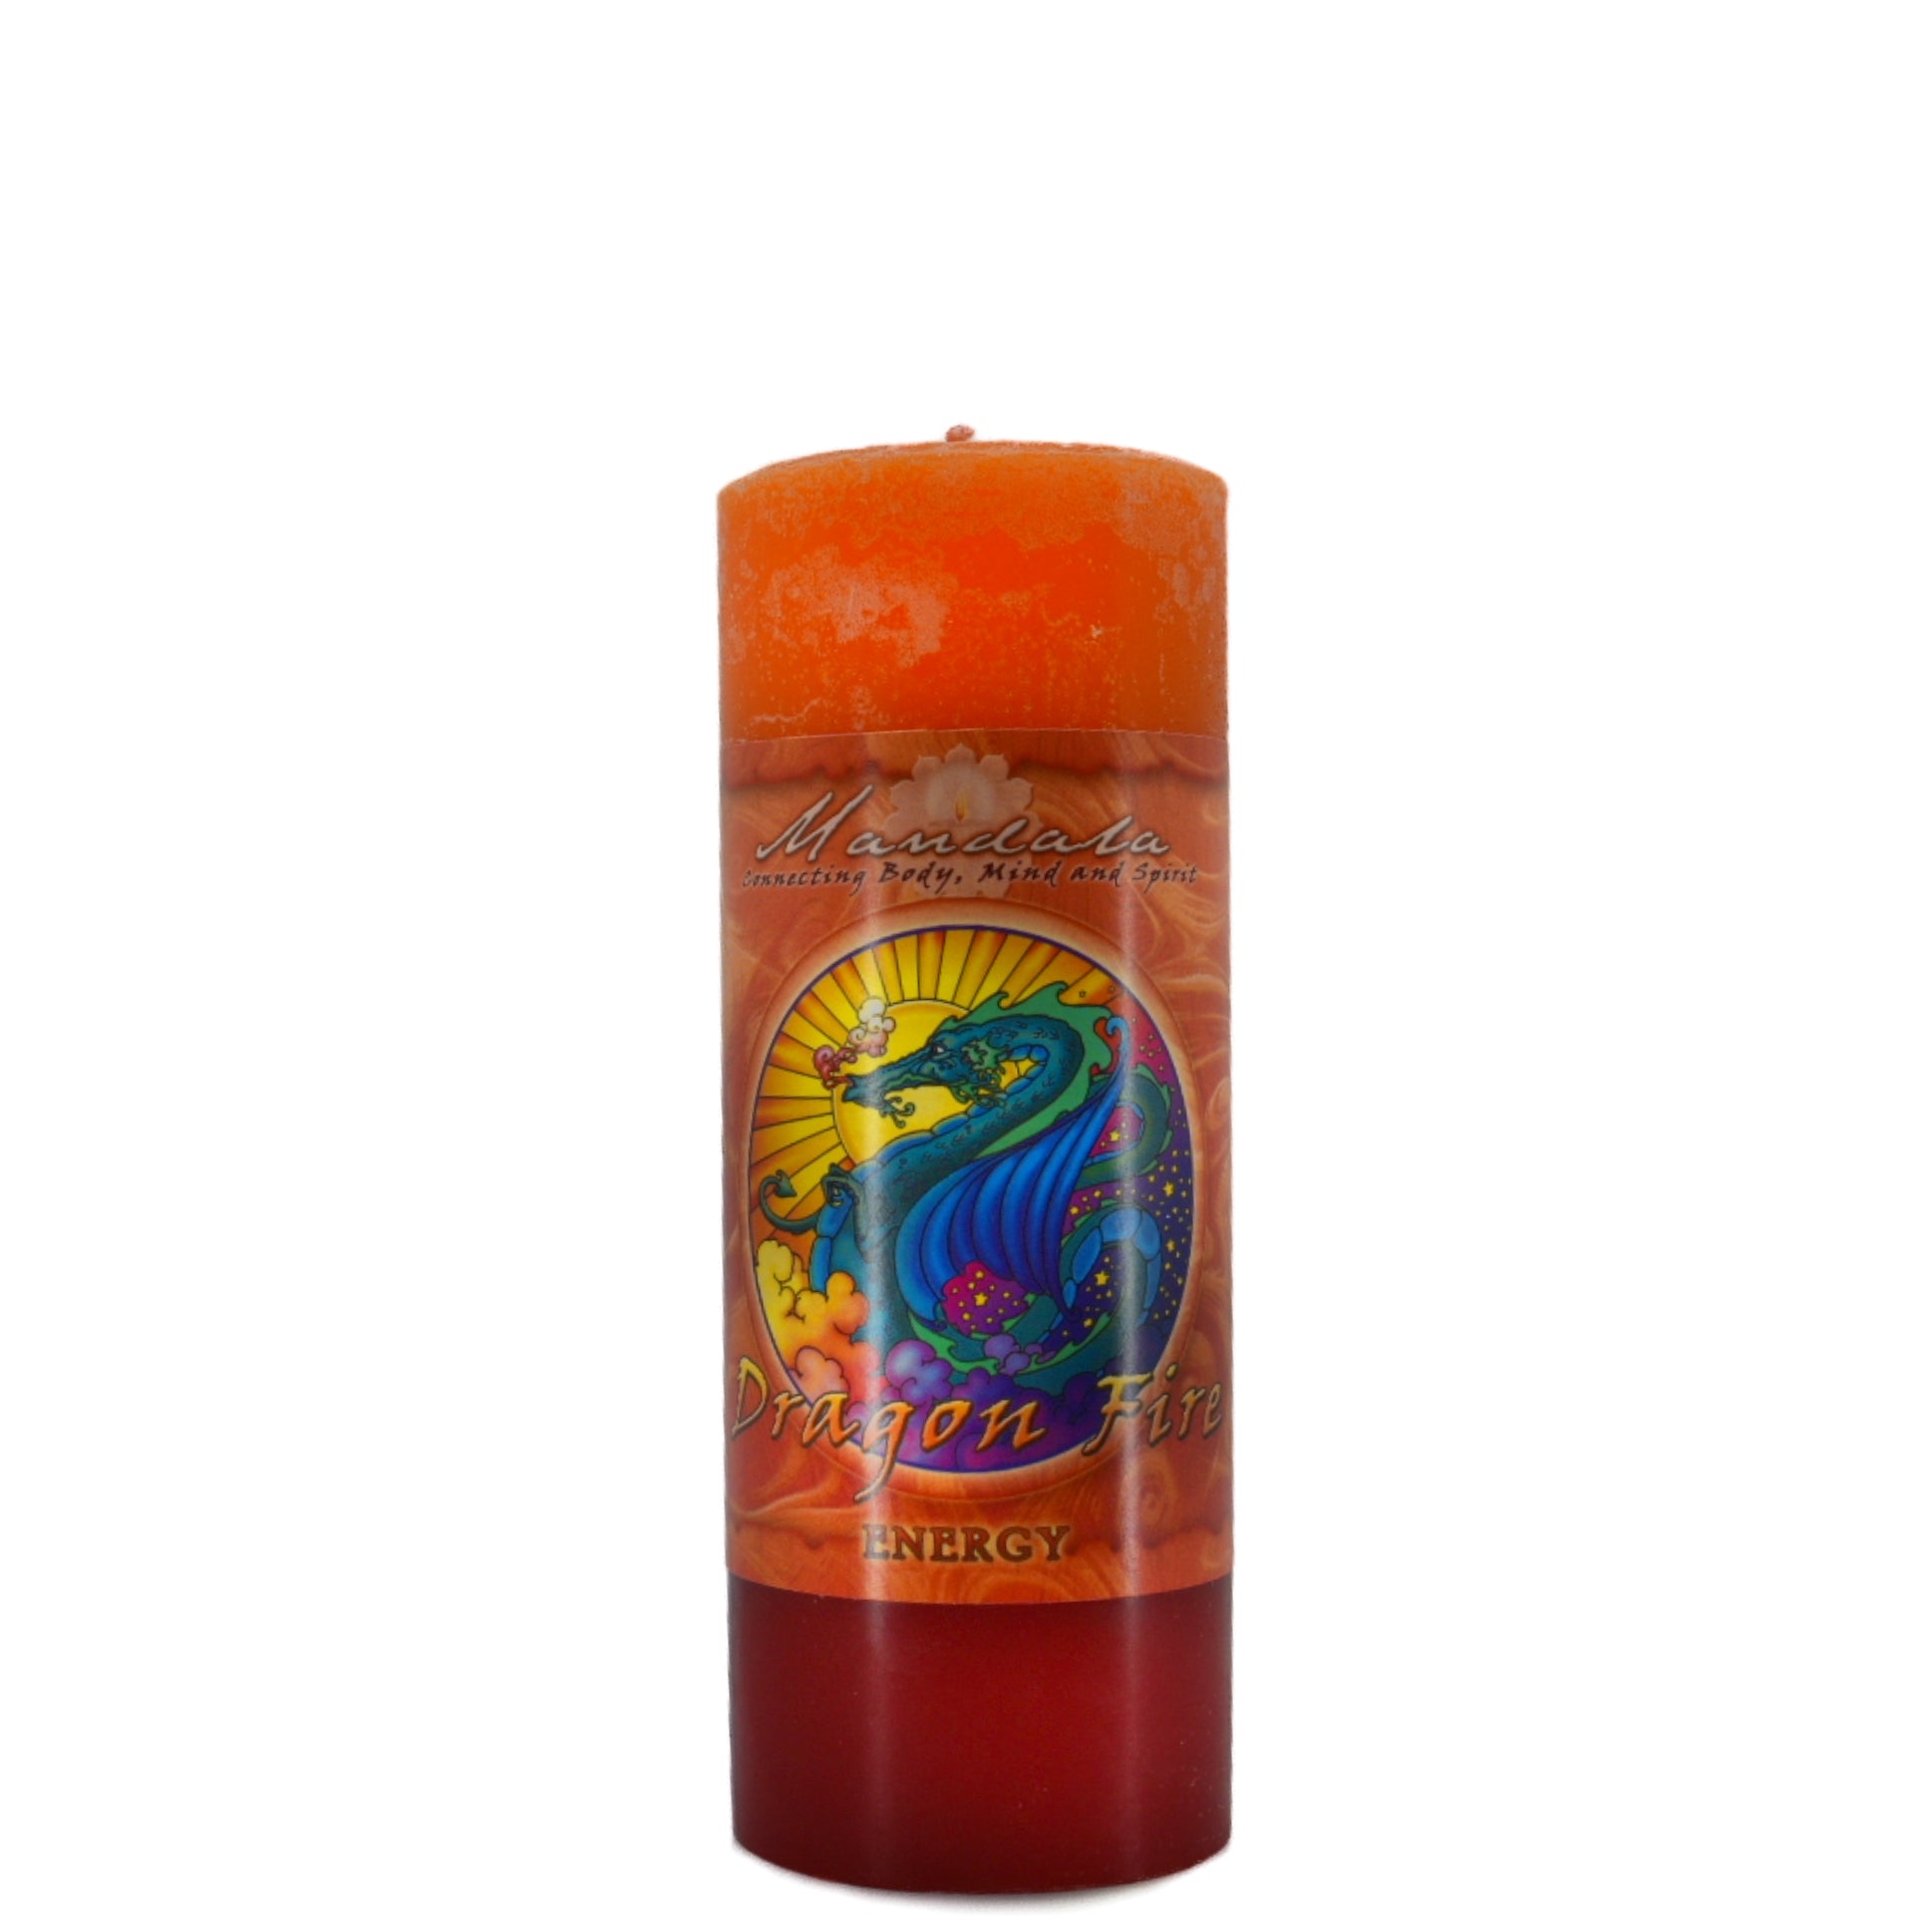 Energy Mandala Candle.  Orange candle scented with essential oils of white grapefruit, cassis and mango.  Use this candle to enhance vitality or Chi energy - life's purpose or focus - excitement and inspiration.